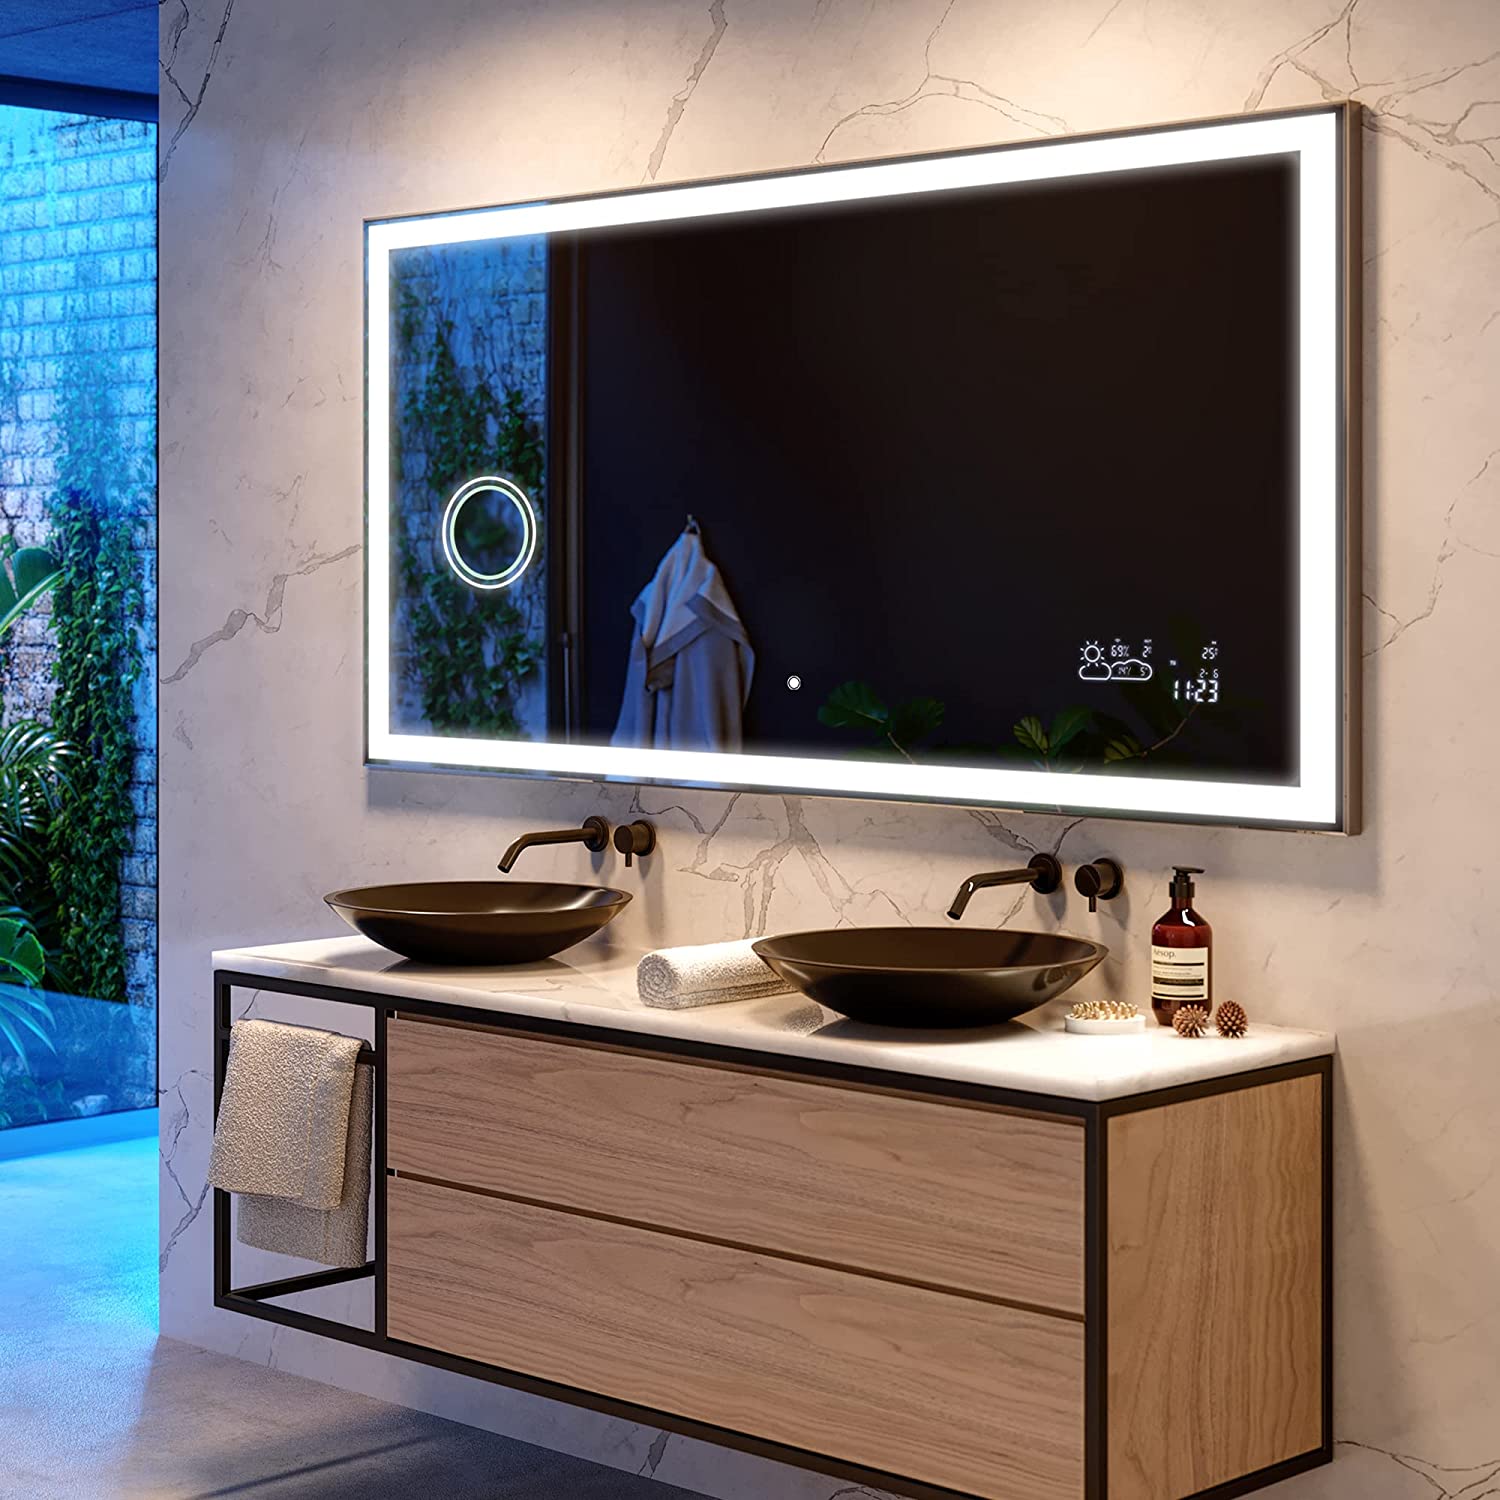 A Step-by-Step Guide for How to Build Your Own Smart Mirror